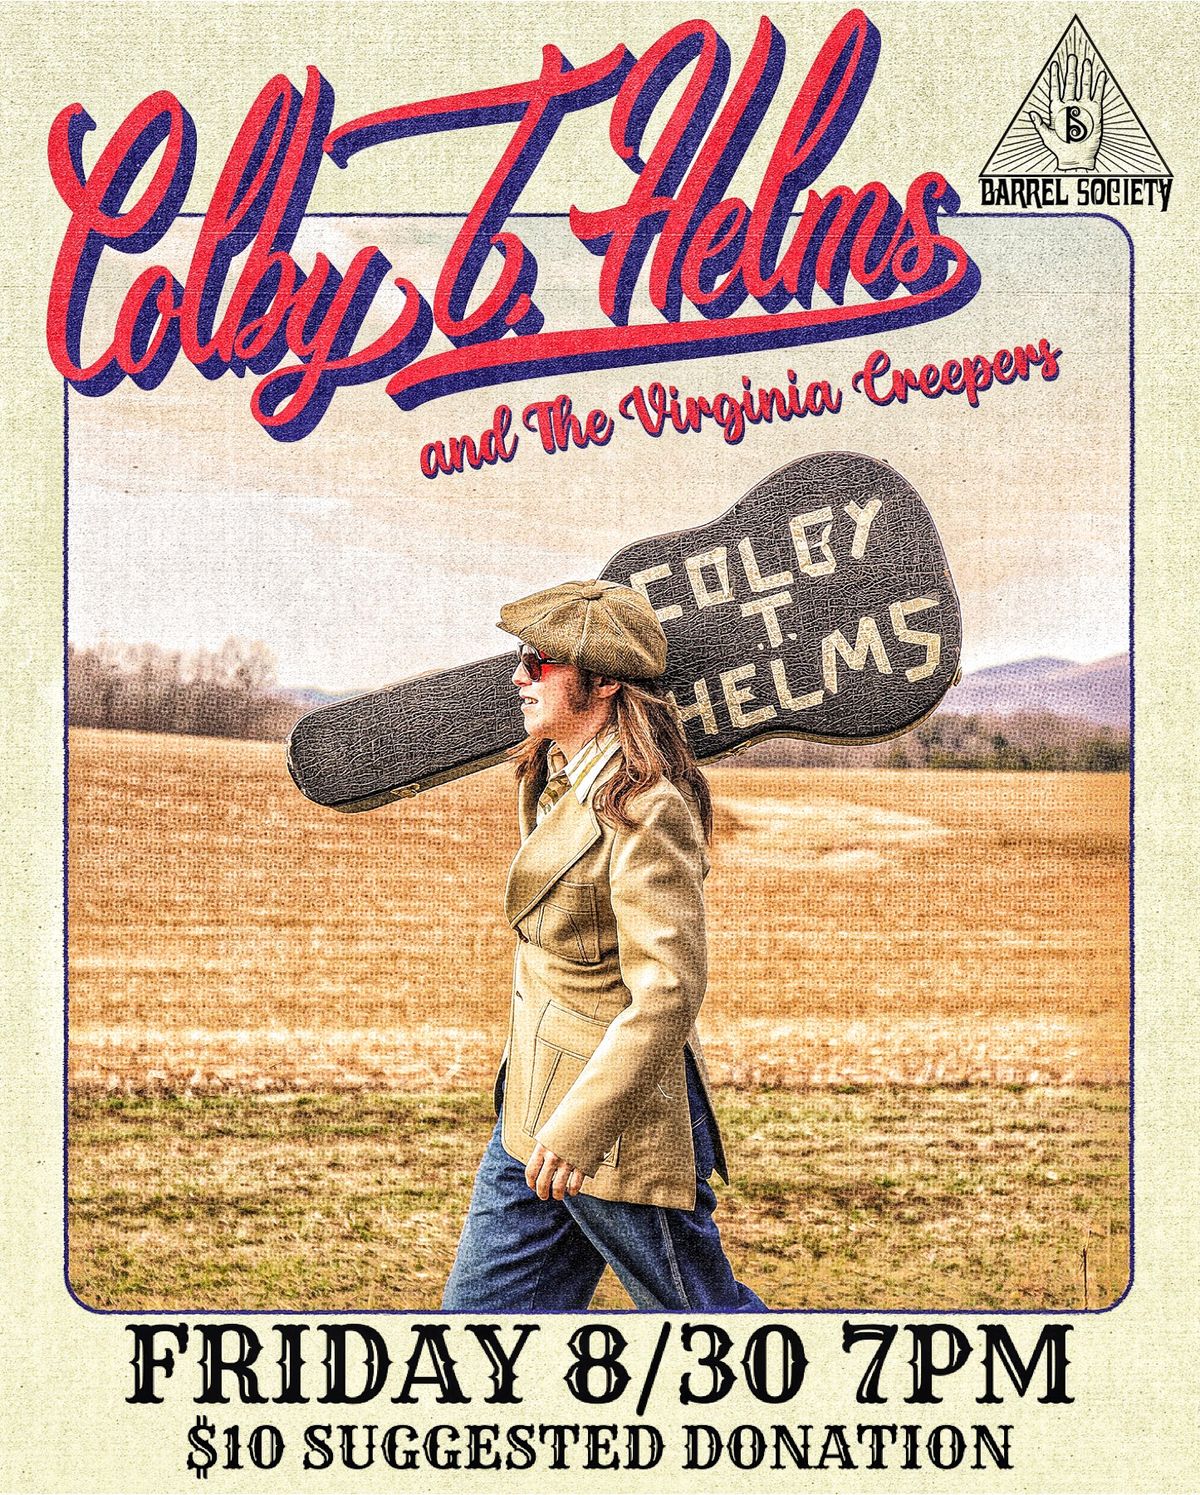 Colby T. Helms & The Virginia Creepers LIVE at Barrel Society